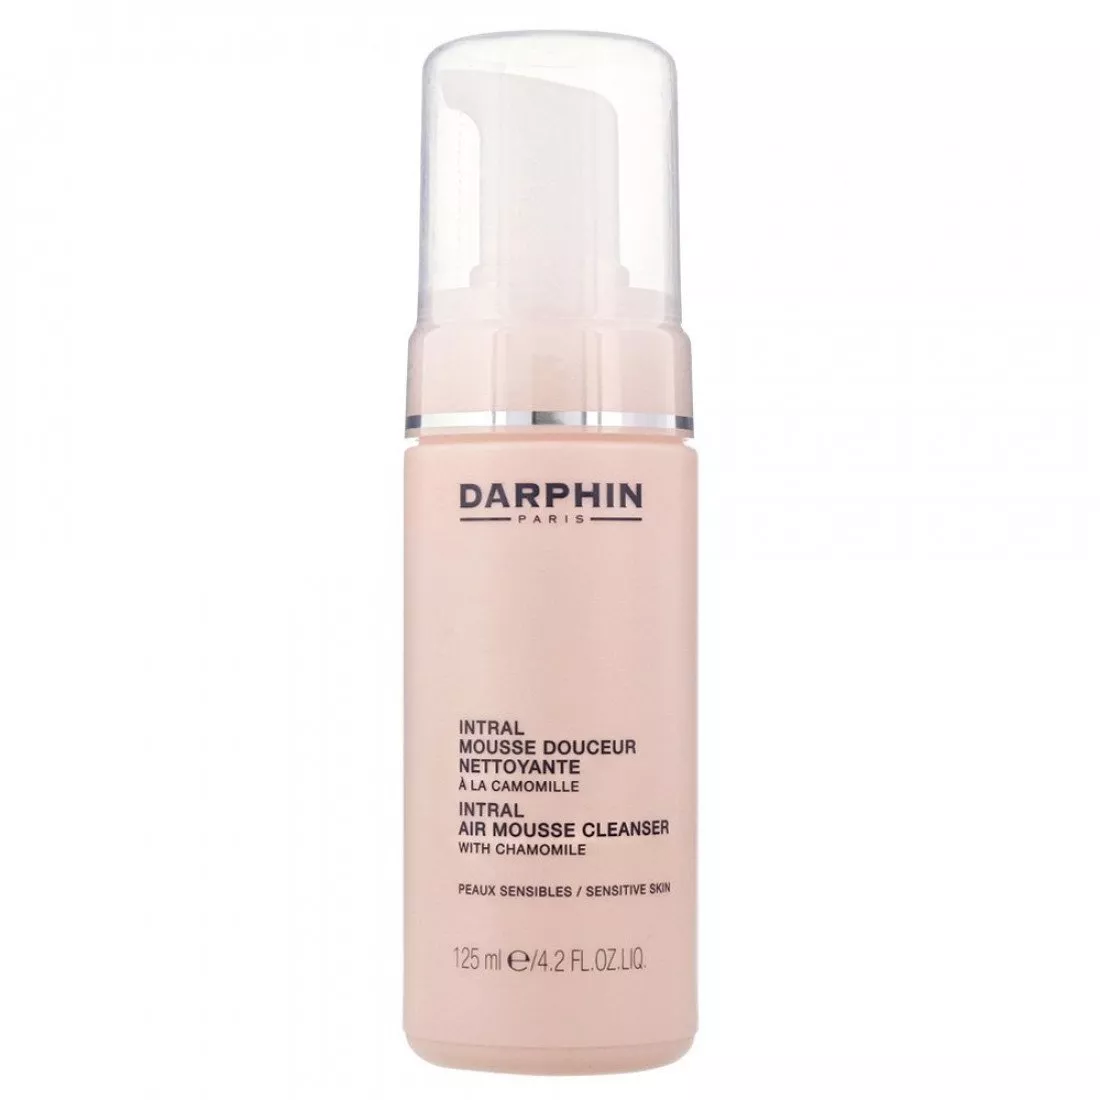 Darphin, Intral air mousse cleanser